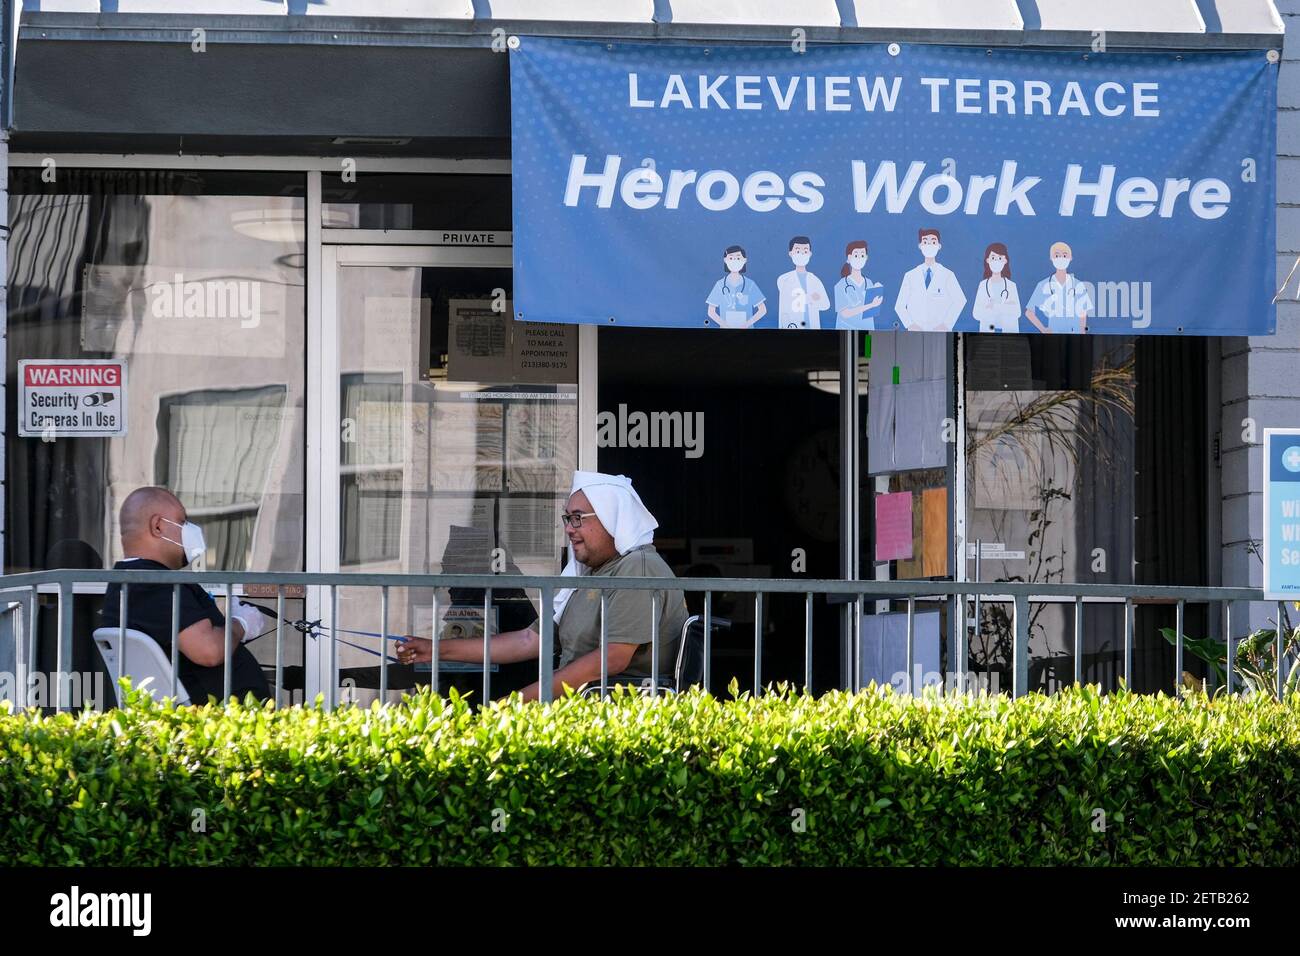 Los Angeles, California, USA. 1st Mar, 2021. People are seen at Lakeview Terrace Skilled Nursing Facility in Los Angeles, March 1, 2021. Los Angeles City Attorney Mike Feuer announced today his office reached a settlement with Lakeview Terrace Skilled Nursing Facility, which was accused of patient dumping during the COVID-19 pandemic, as well as abuse, neglect, denial of care and efforts to conceal its conduct. Credit: Ringo Chiu/ZUMA Wire/Alamy Live News Stock Photo